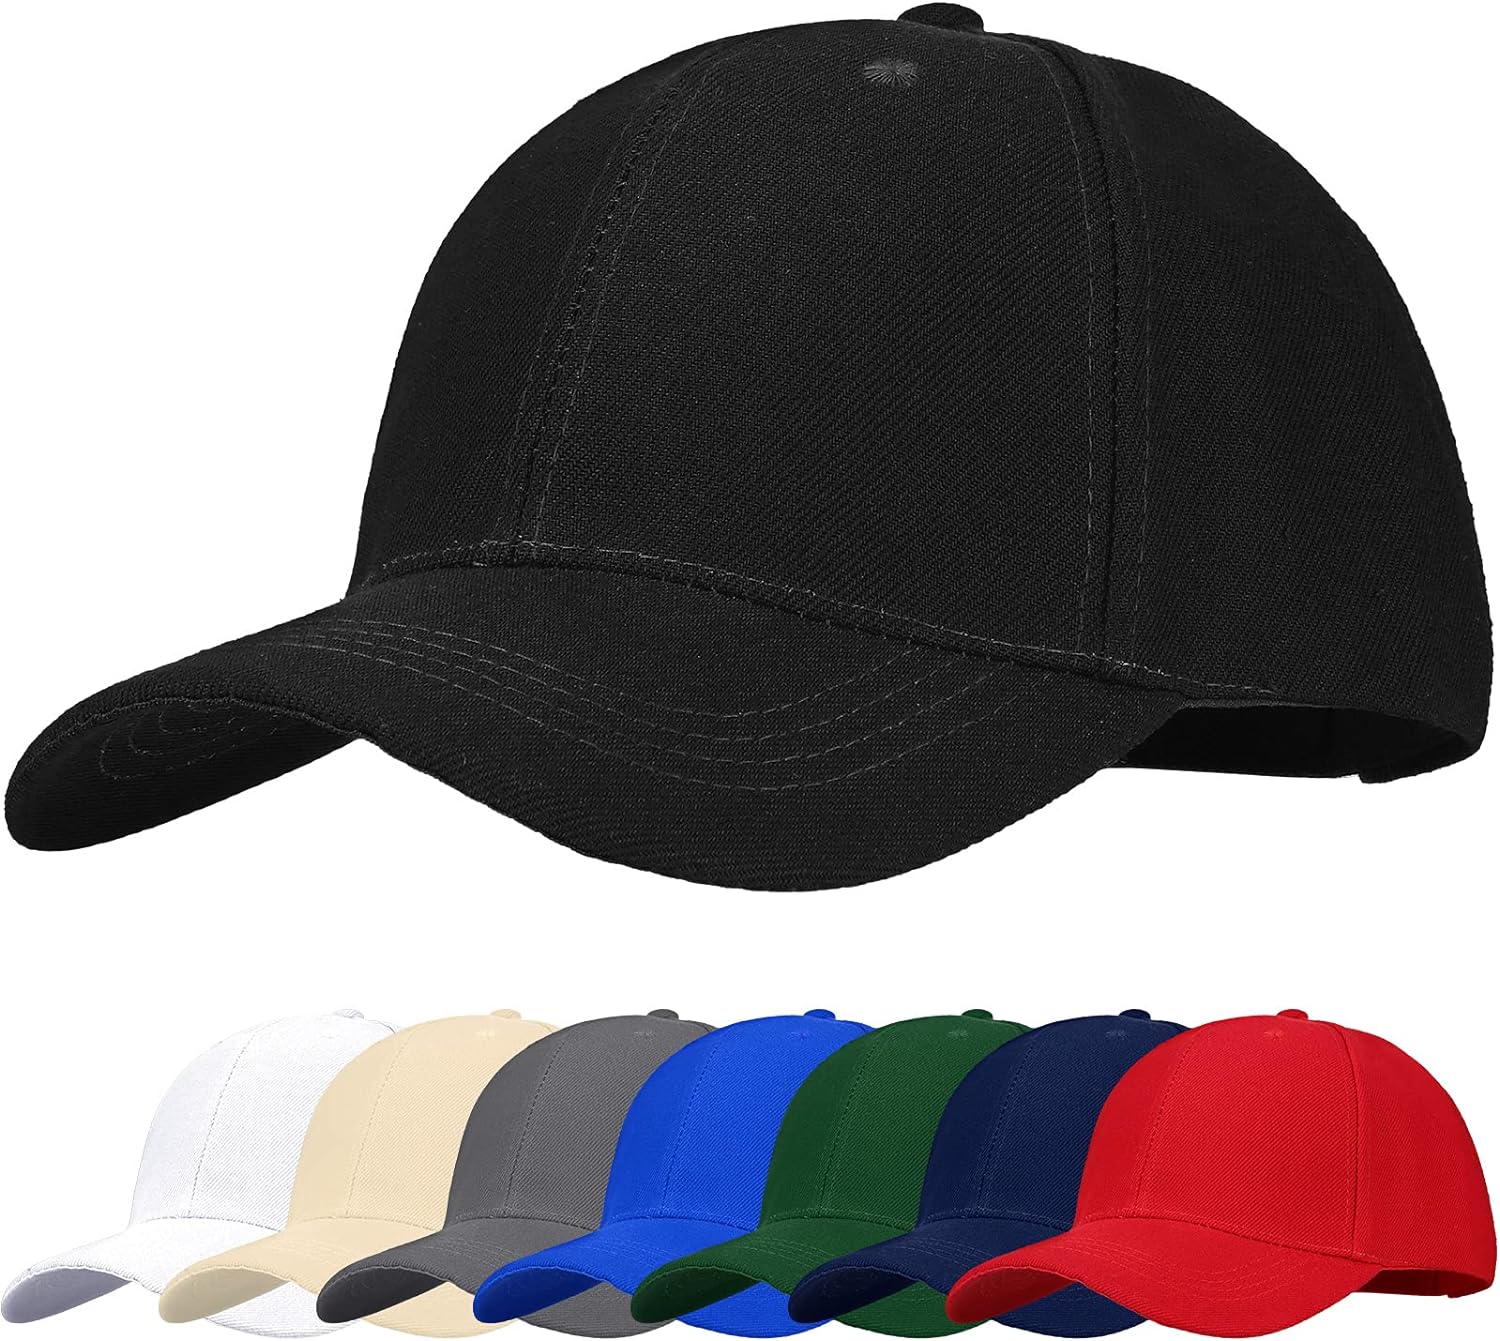 Geyoga 8 Pieces Baseball Cap Adjustable Size Plain Sports Hat Dad Hat Adjustable Hat for Men Women Running Workouts and Outdoor Activities, 8 Colors